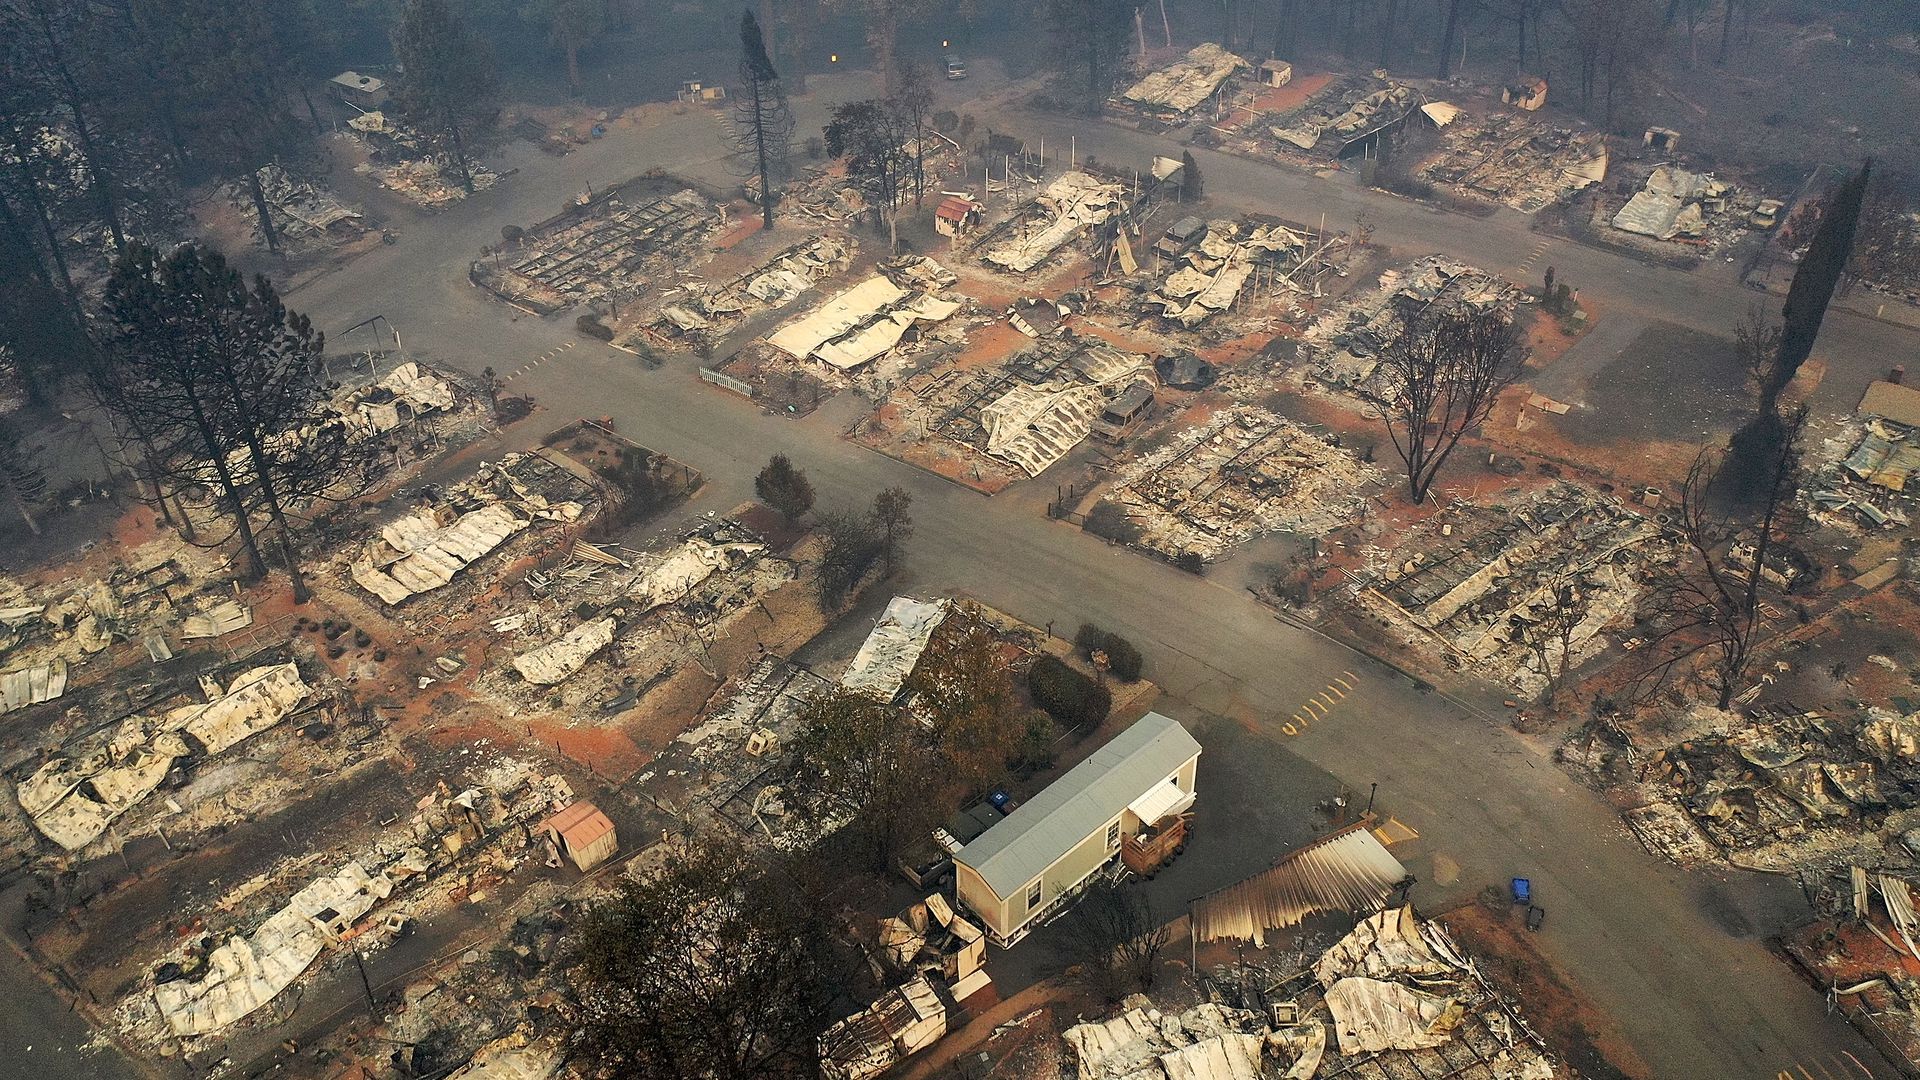 A view of a destroyed neighborhood in California